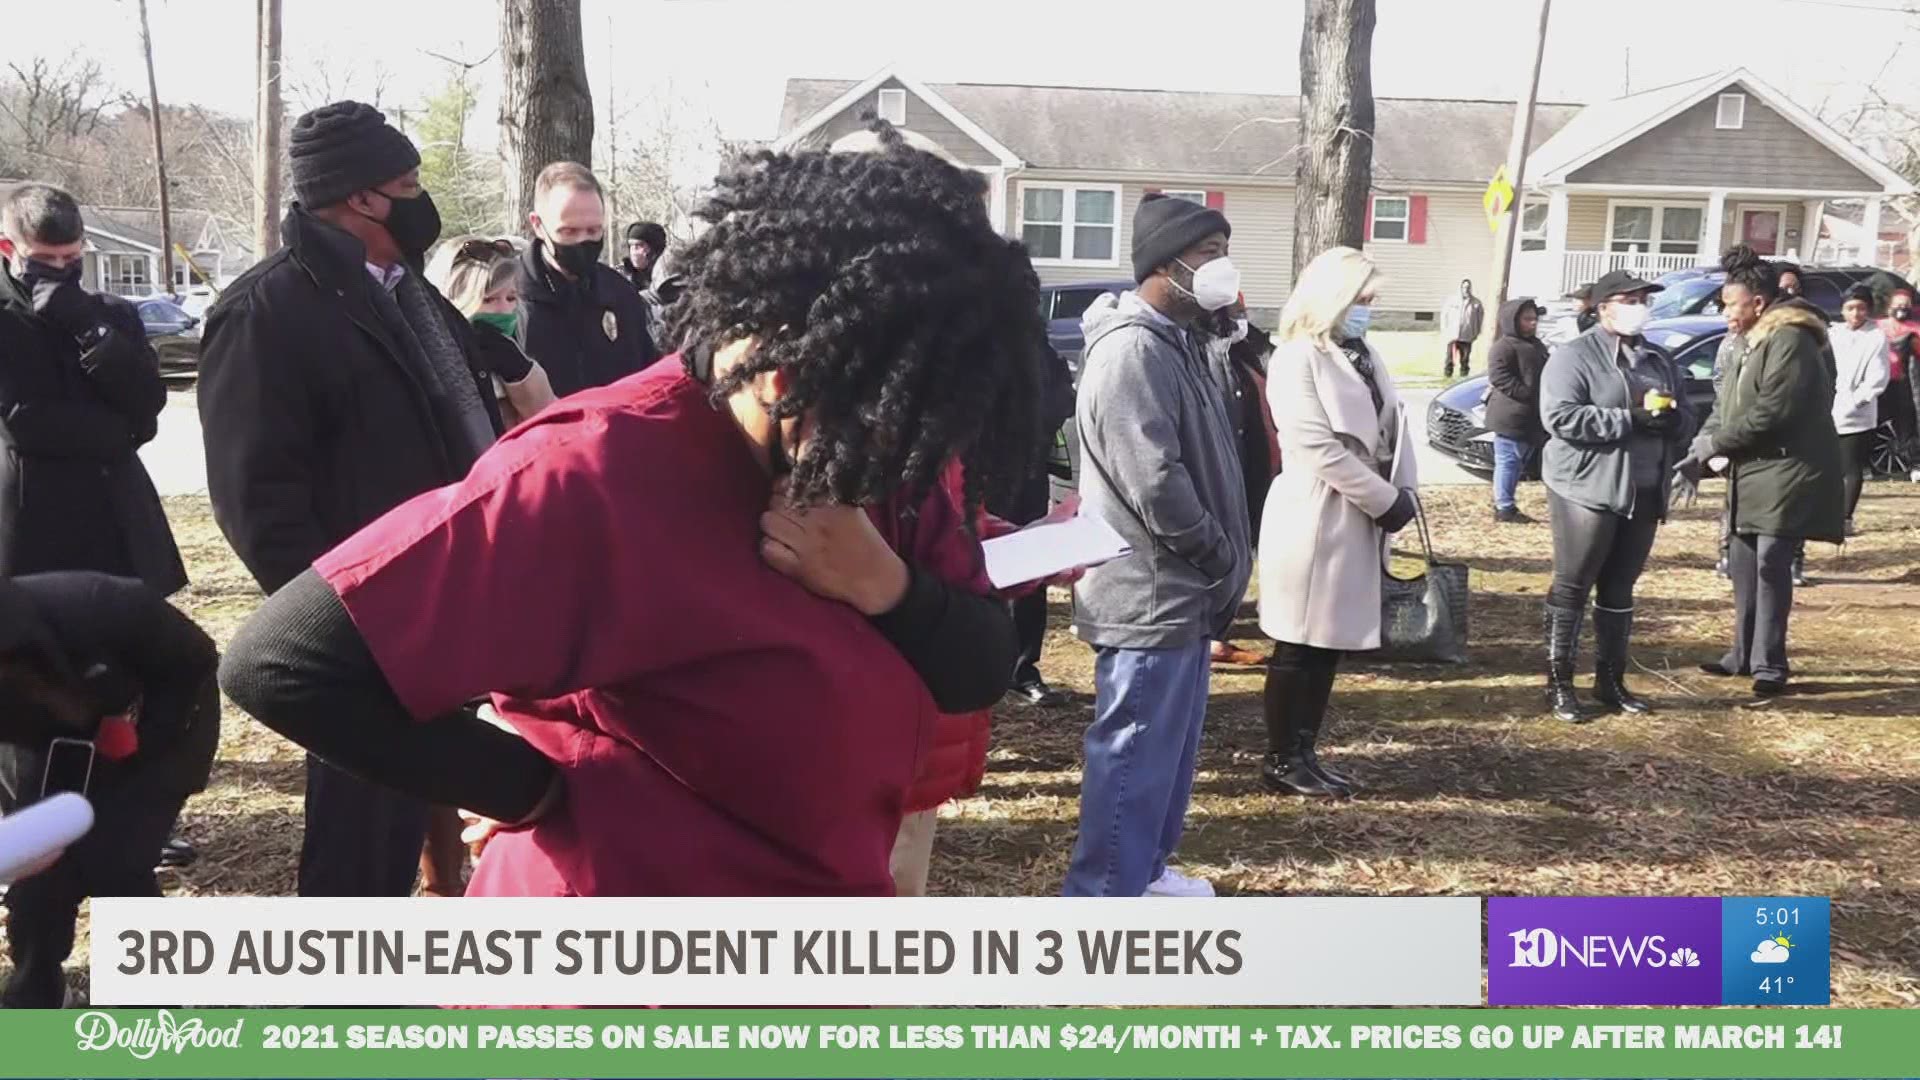 East Knoxville leaders are demanding change in the wake of another deadly shooting. Three students were killed in three weeks in separate incidents.